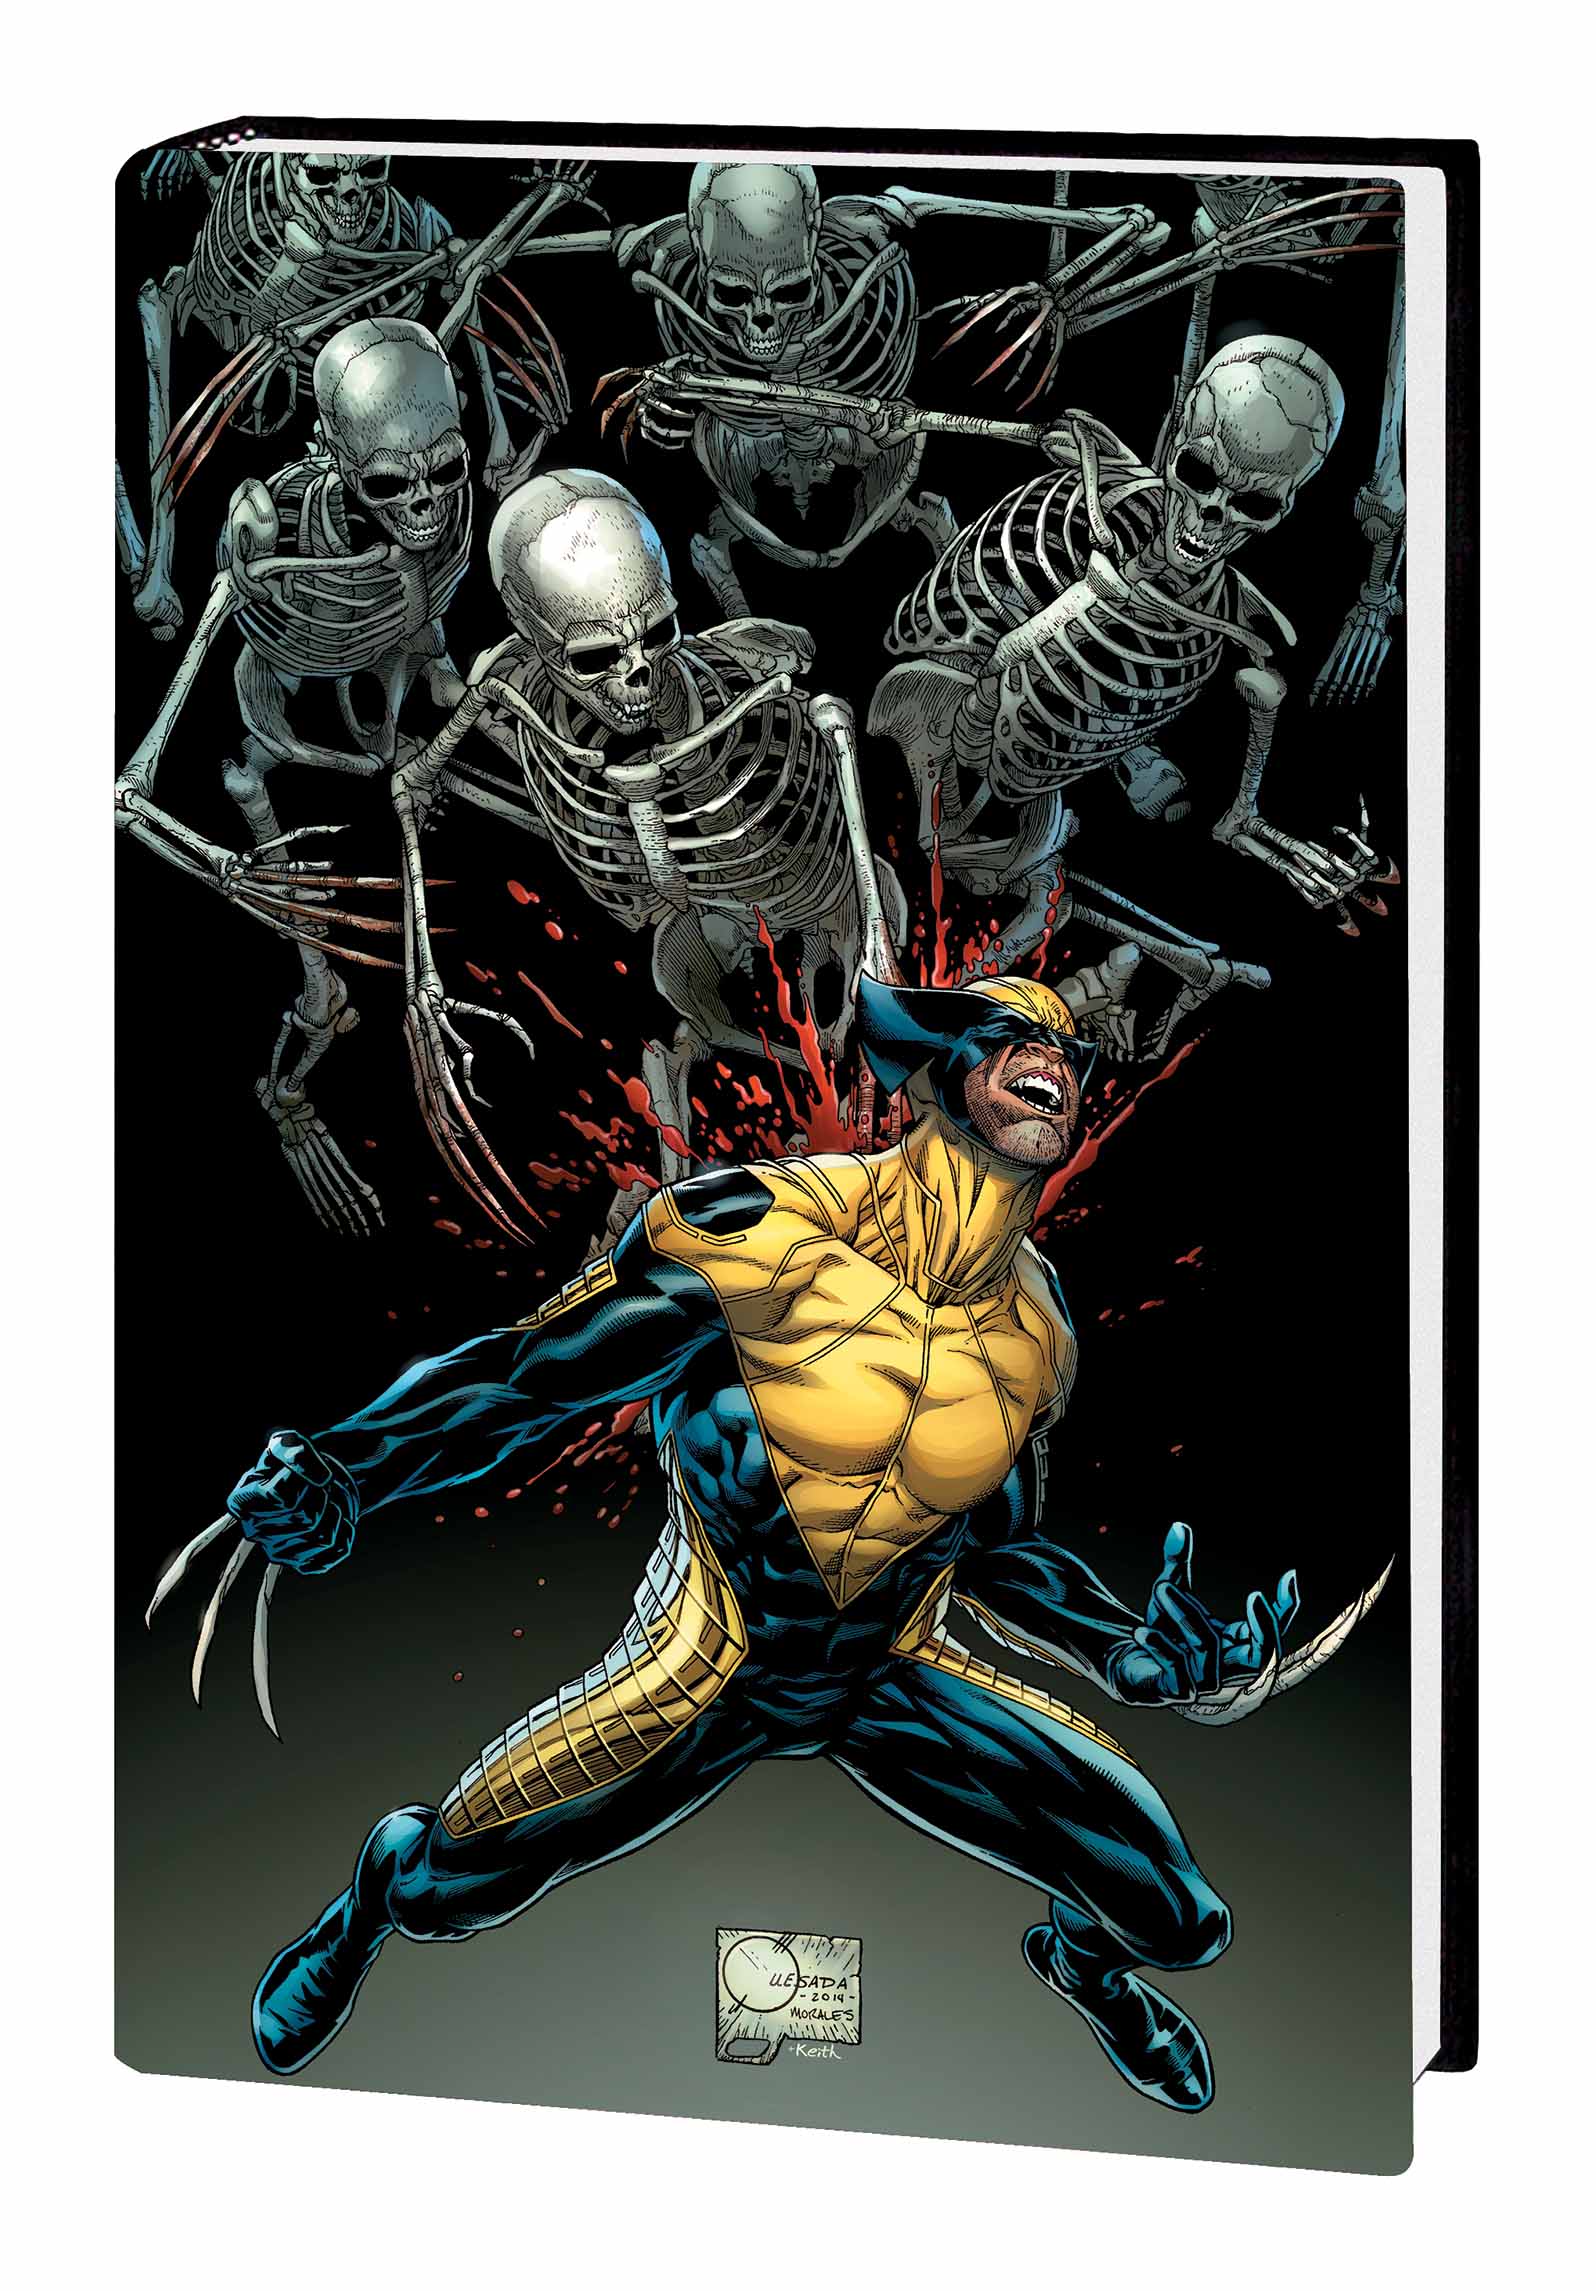 Death of Wolverine (Hardcover)